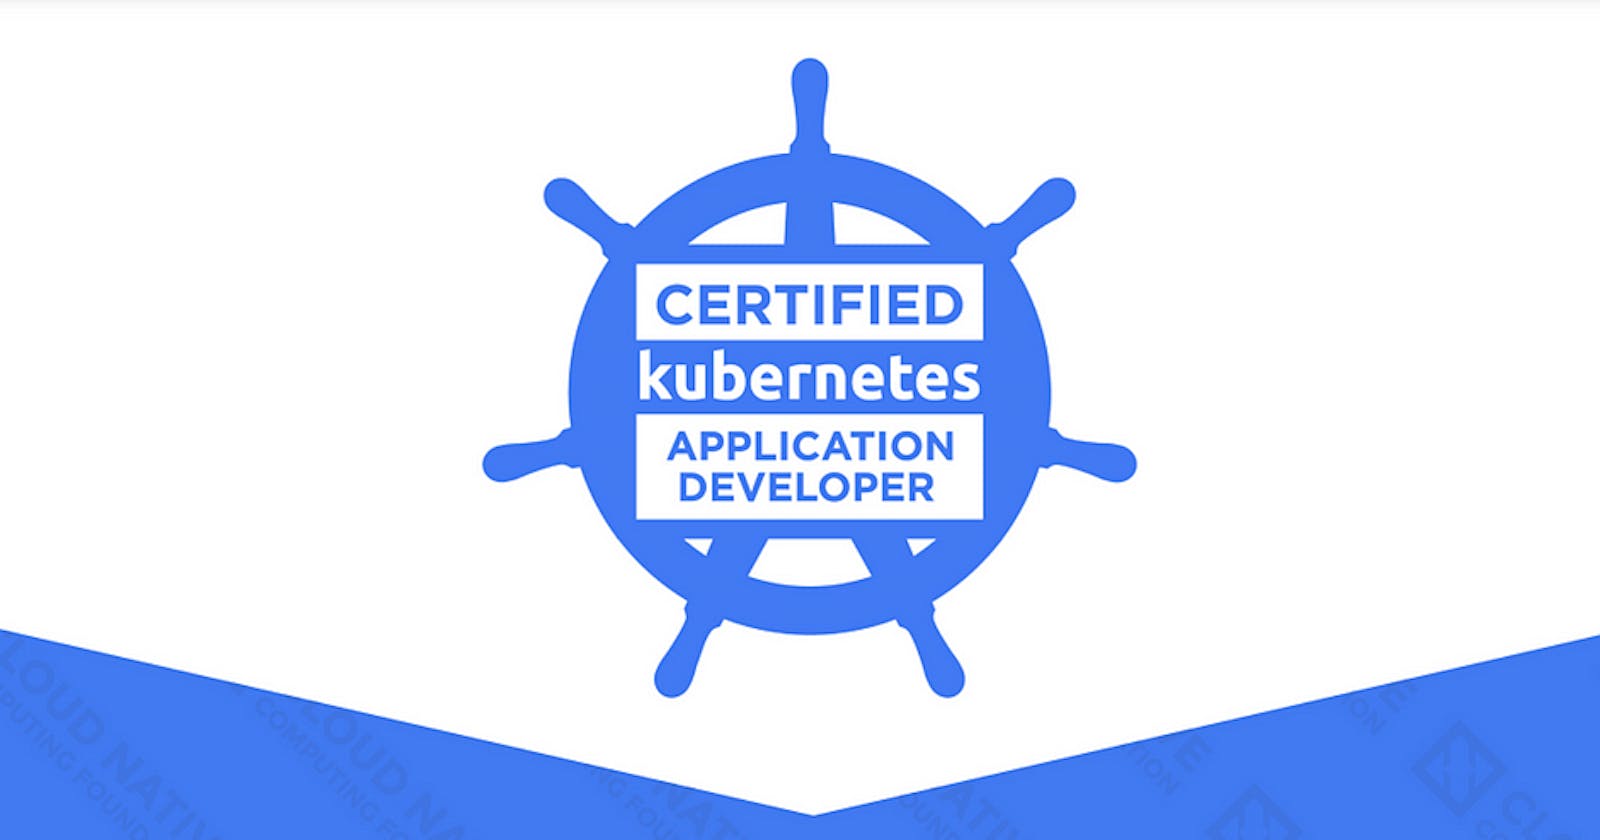 Certified Kubernetes Application Developer (CKAD) Program: An Introduction and In-depth Details